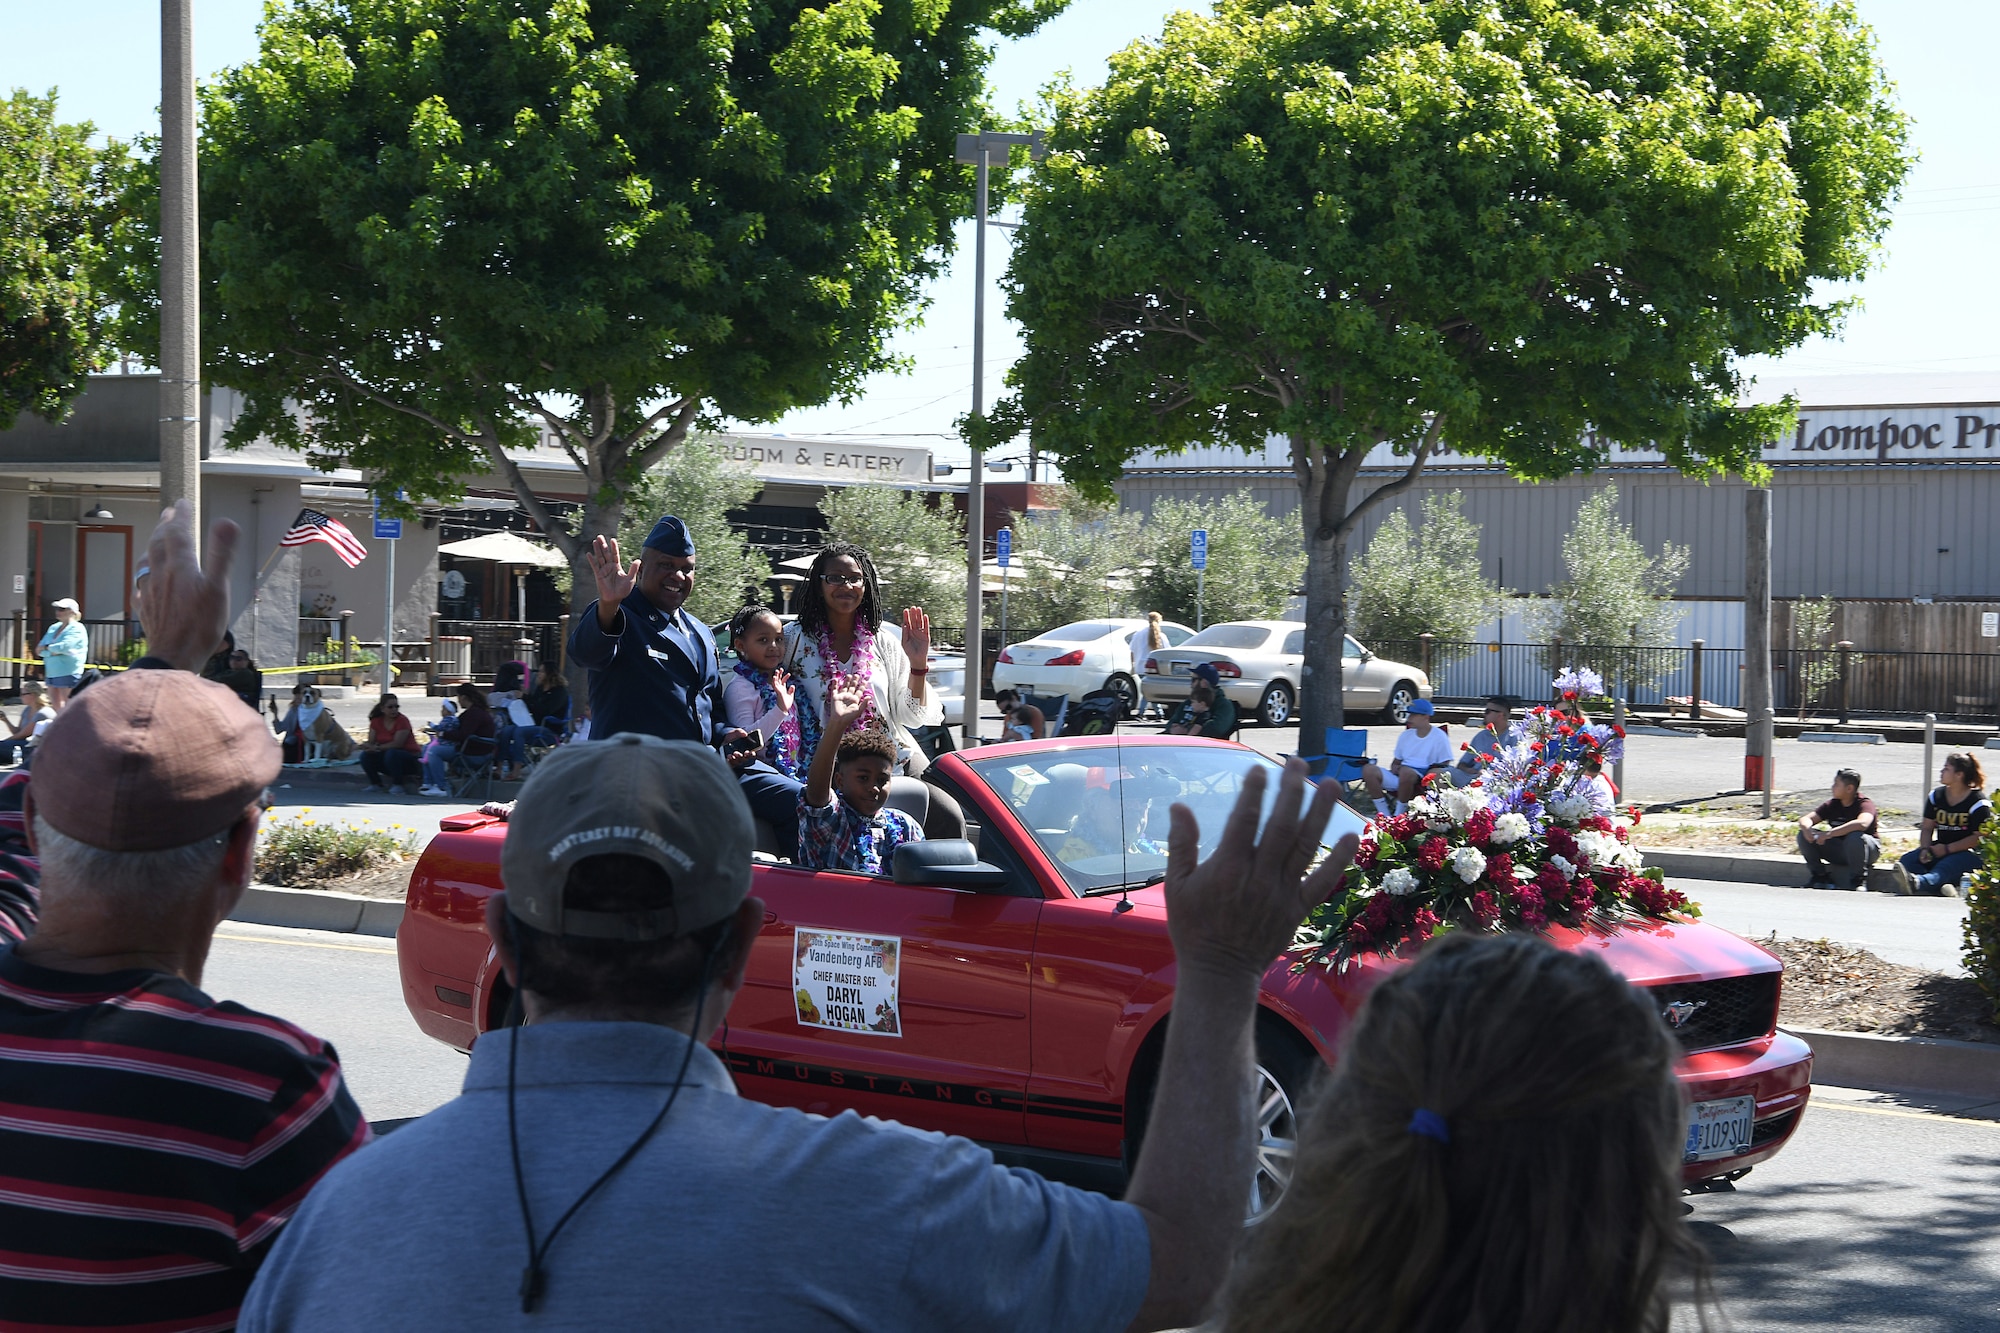 Chief Master Sgt. Daryl Hogan Jr., 30th Space Wing command chief, and his family participate in the 2019 Lompoc Flower Festival Parade June 29, 2019, in Lompoc, Calif.